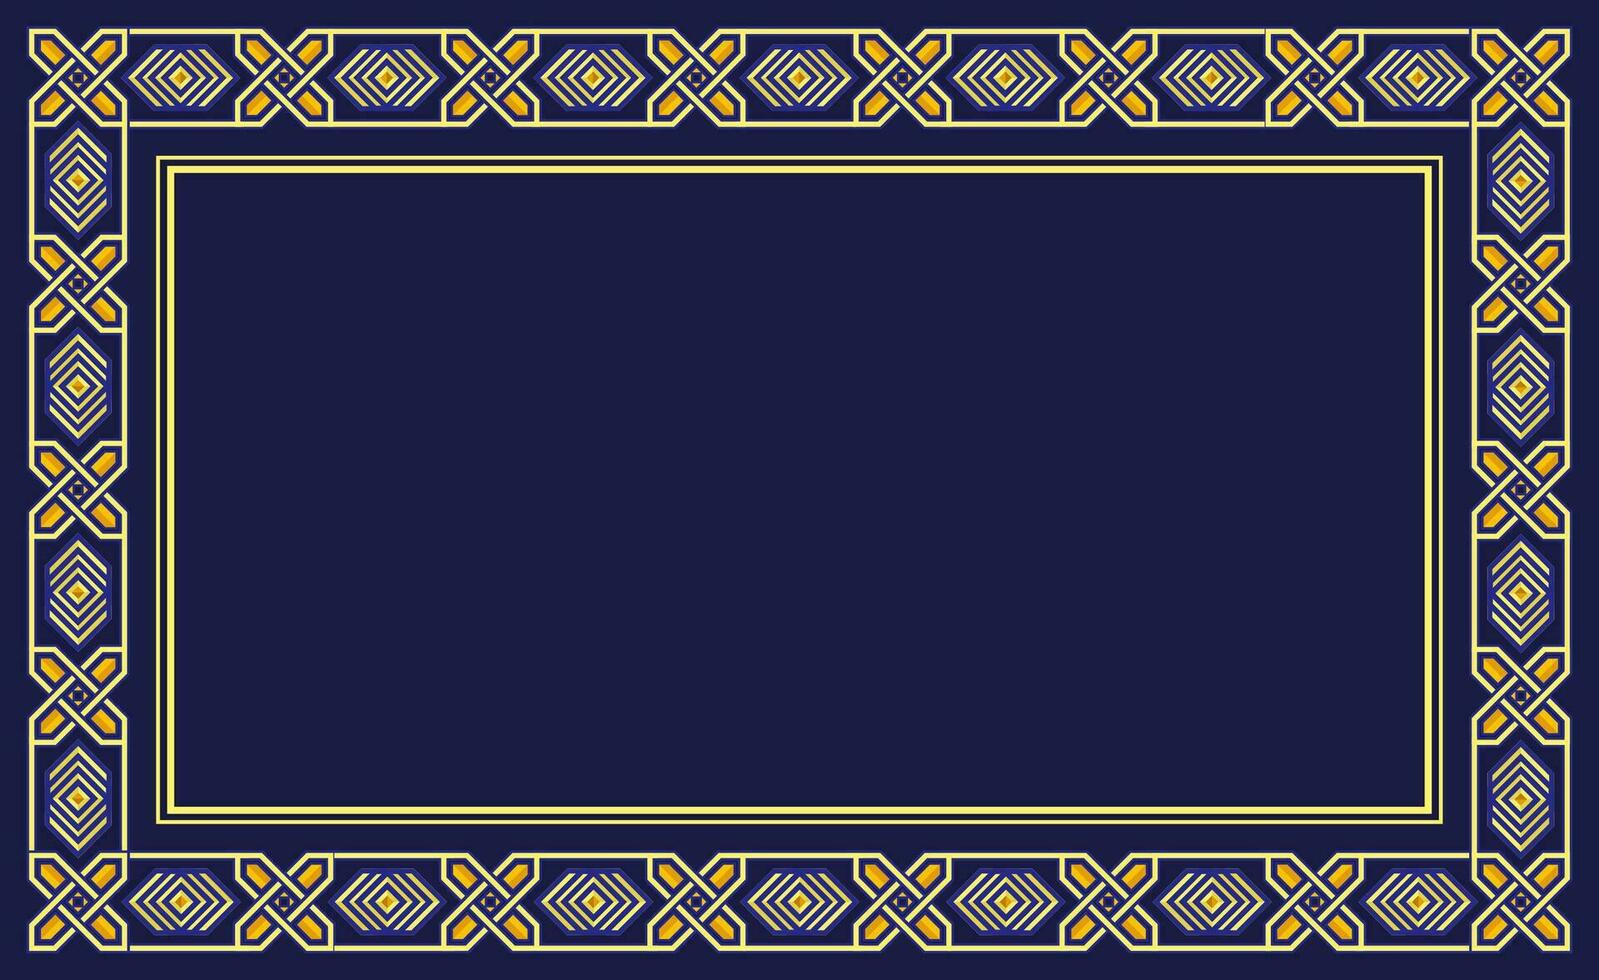 Islamic Ornament Template Banner Background vector